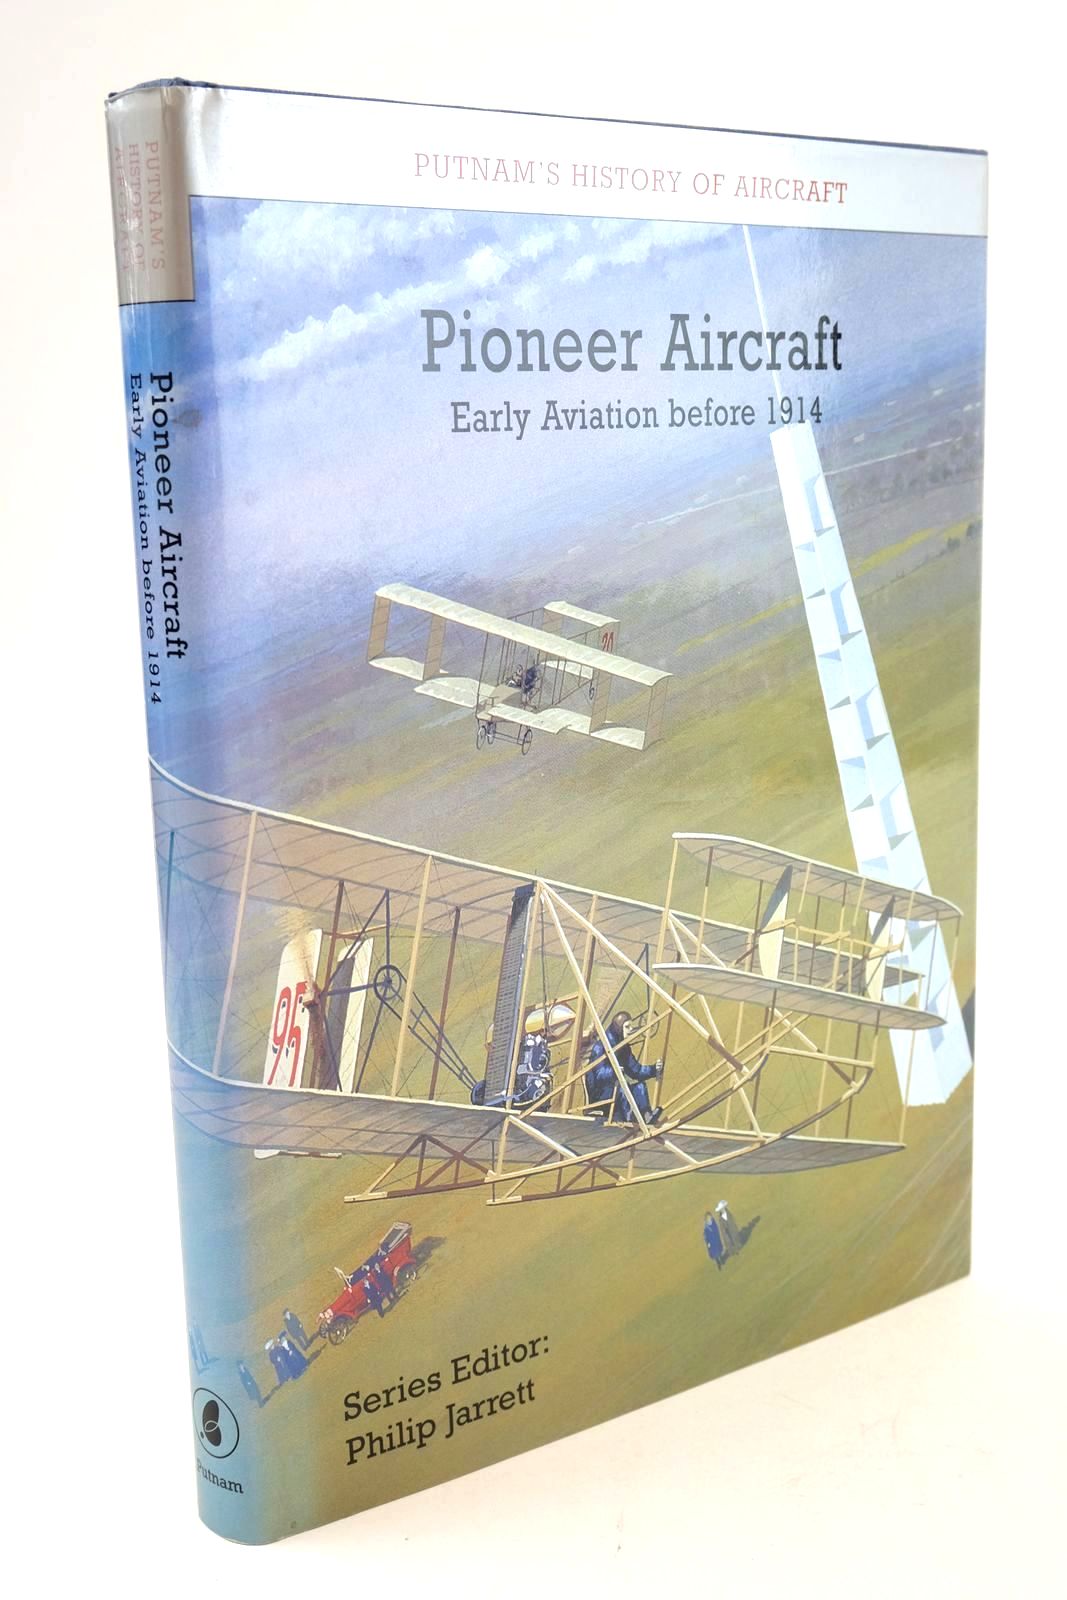 Photo of PIONEER AIRCRAFT EARLY AVIATION TO 1914 written by Jarrett, Philip published by Putnam (STOCK CODE: 1325200)  for sale by Stella & Rose's Books